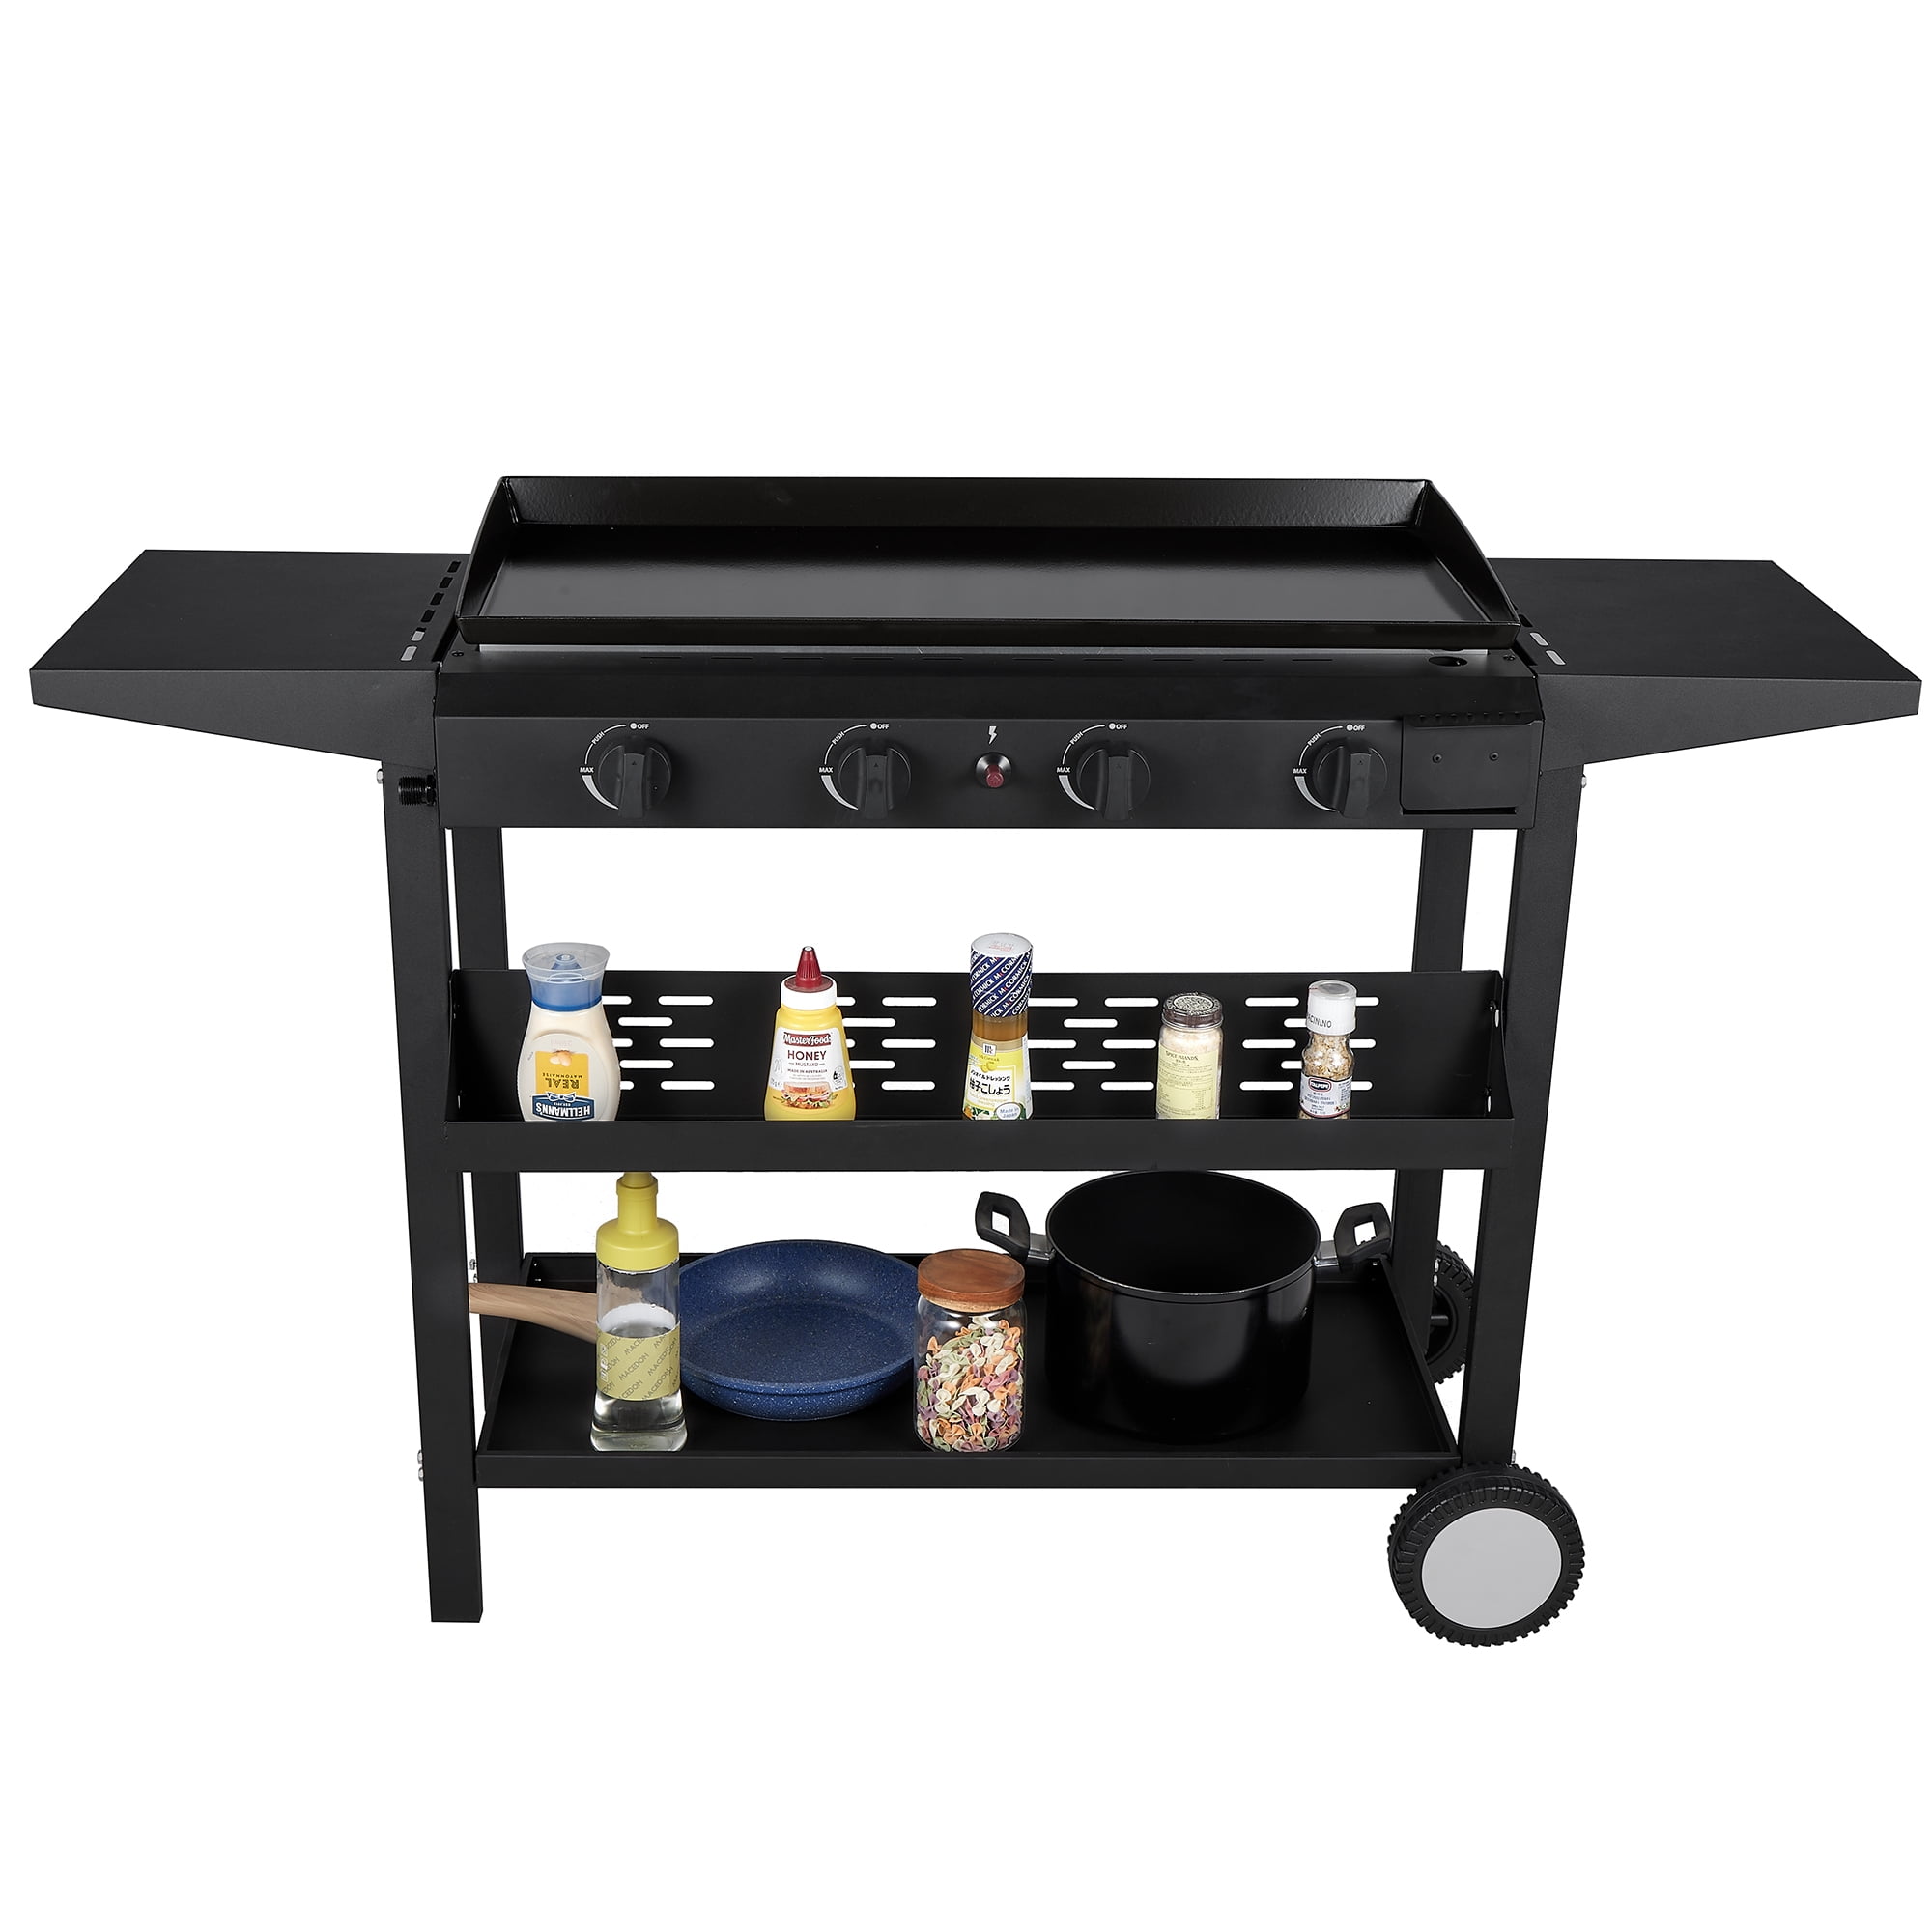 Griller's Choice Outdoor Griddle Grill Propane Gas Flat Top - Hood